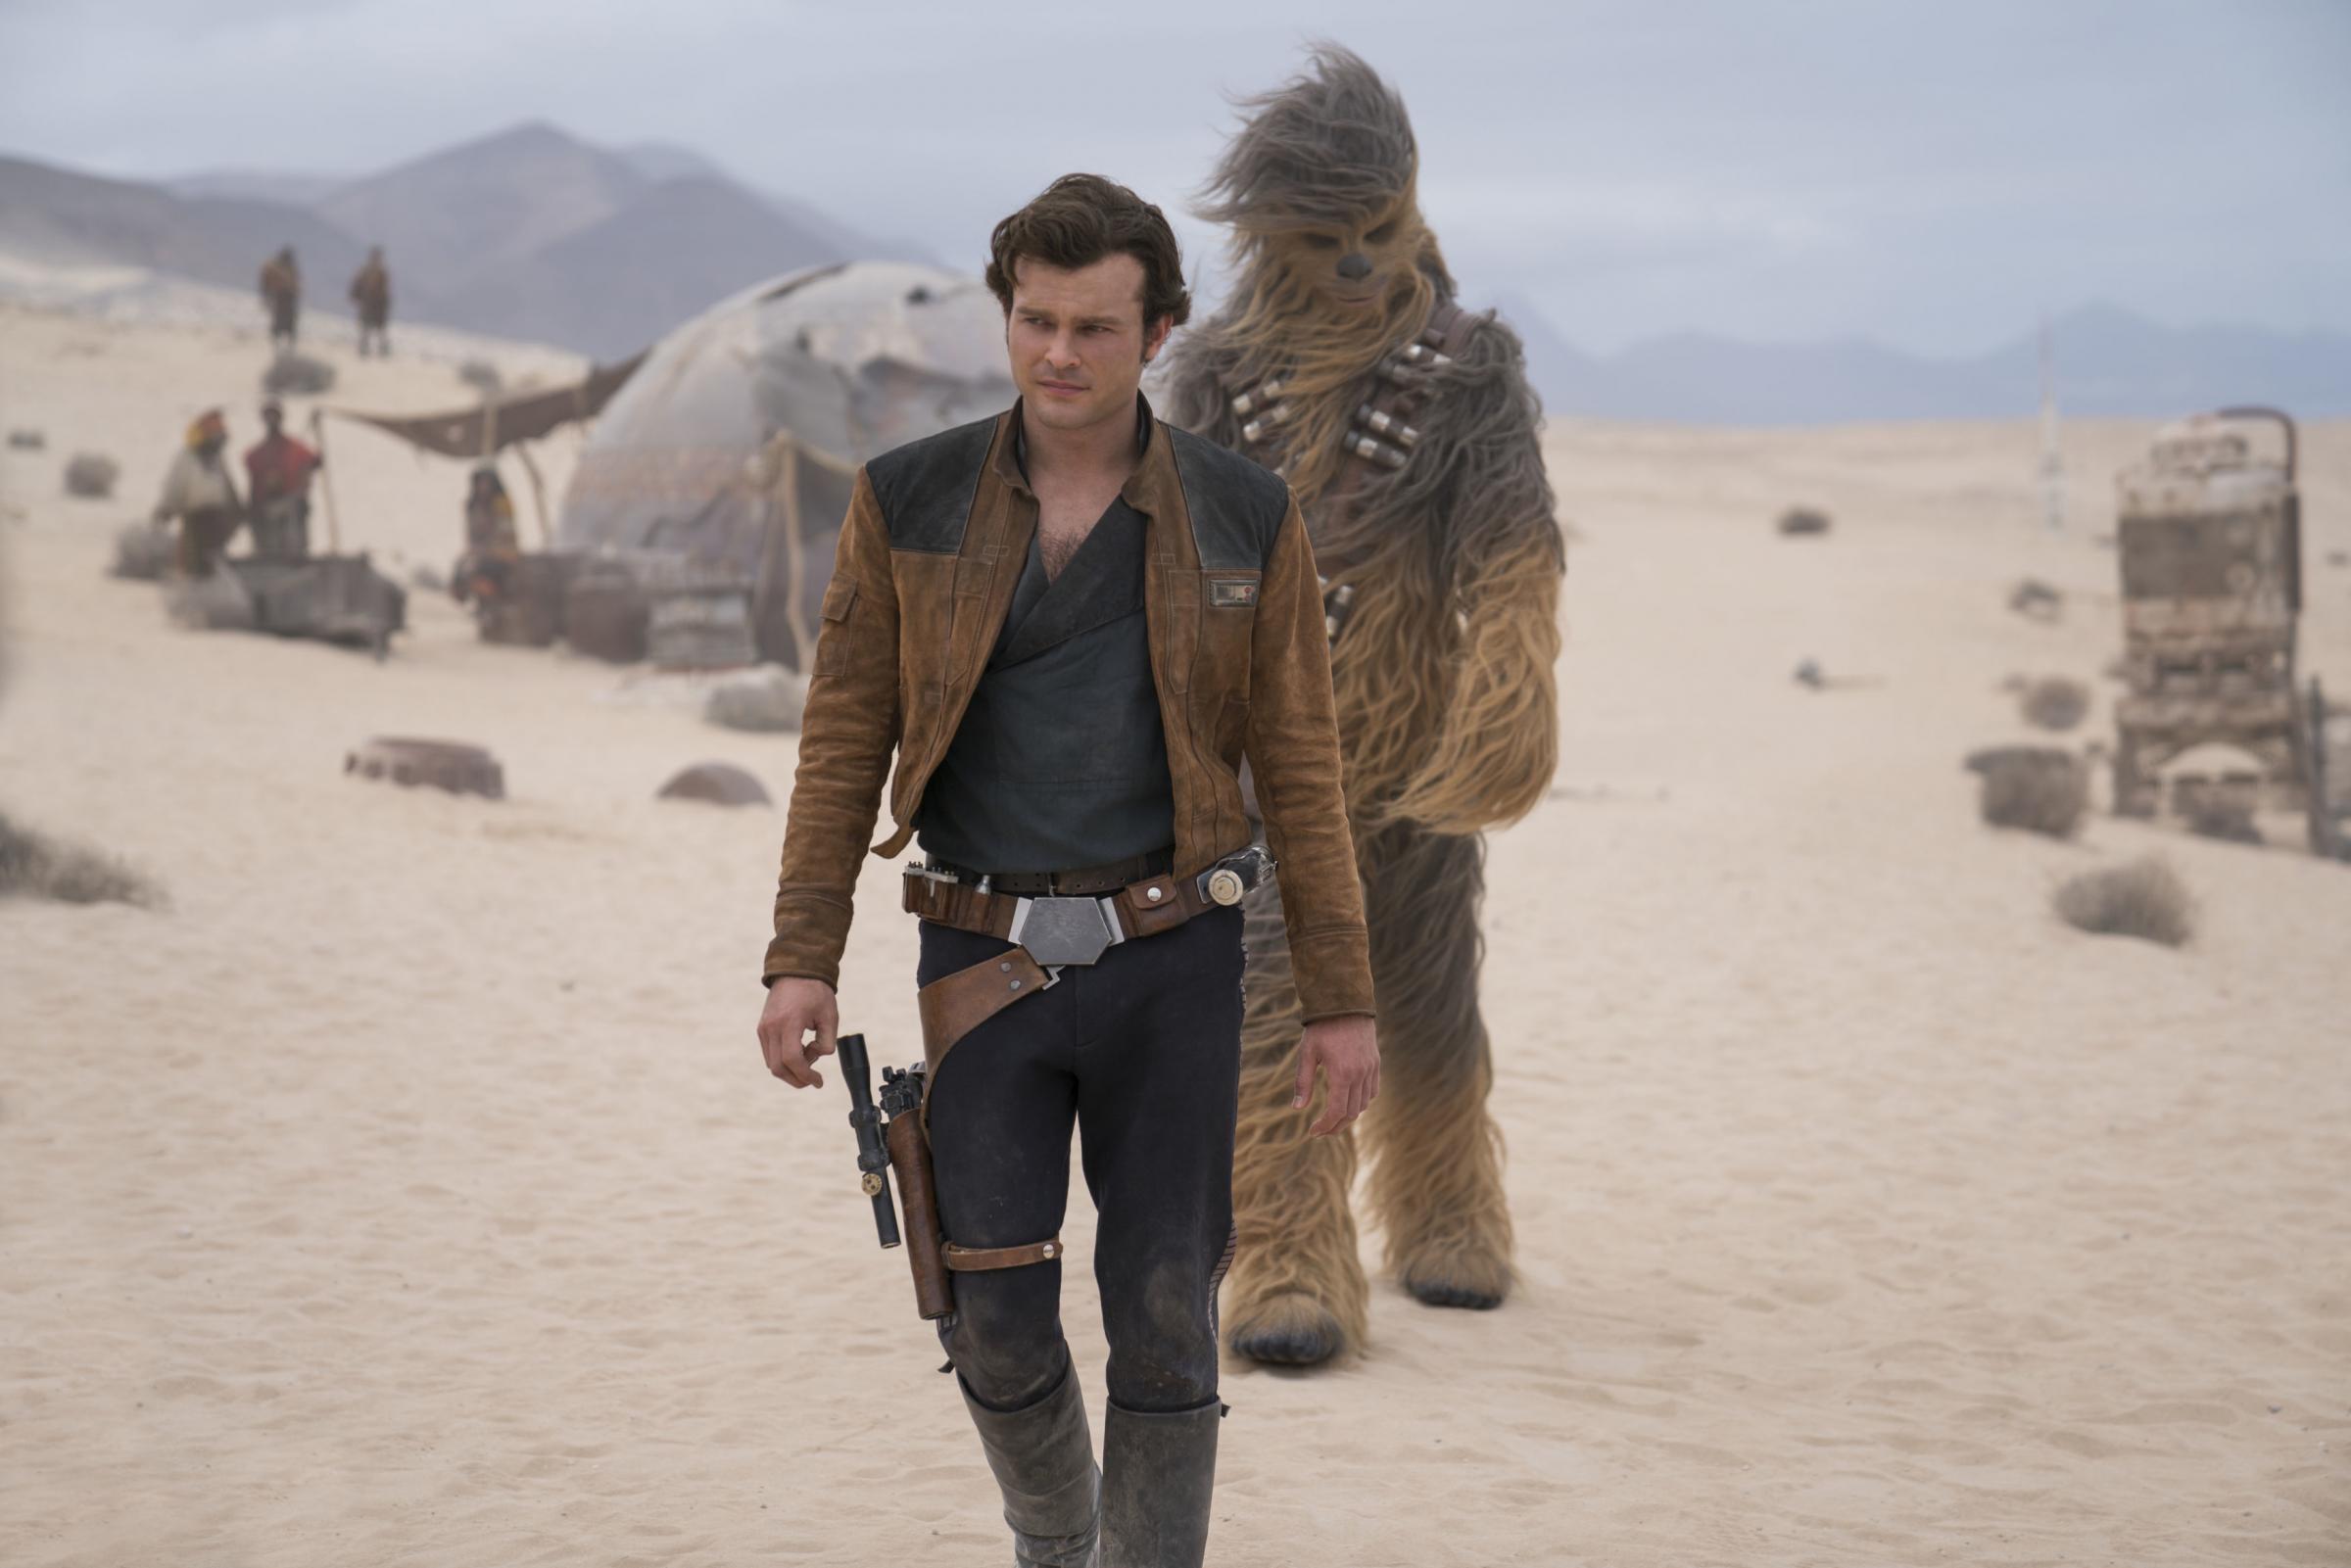 Undated film still handout from Solo: A Star Wars Story. Pictured: Alden Ehrenreich as Han Solo and Joonas Suotamo is Chewbacca. See PA Feature SHOWBIZ Download Reviews. Picture credit should read: PA Photo/Lucasfilm Ltd/Jonathan Olley. WARNING: This